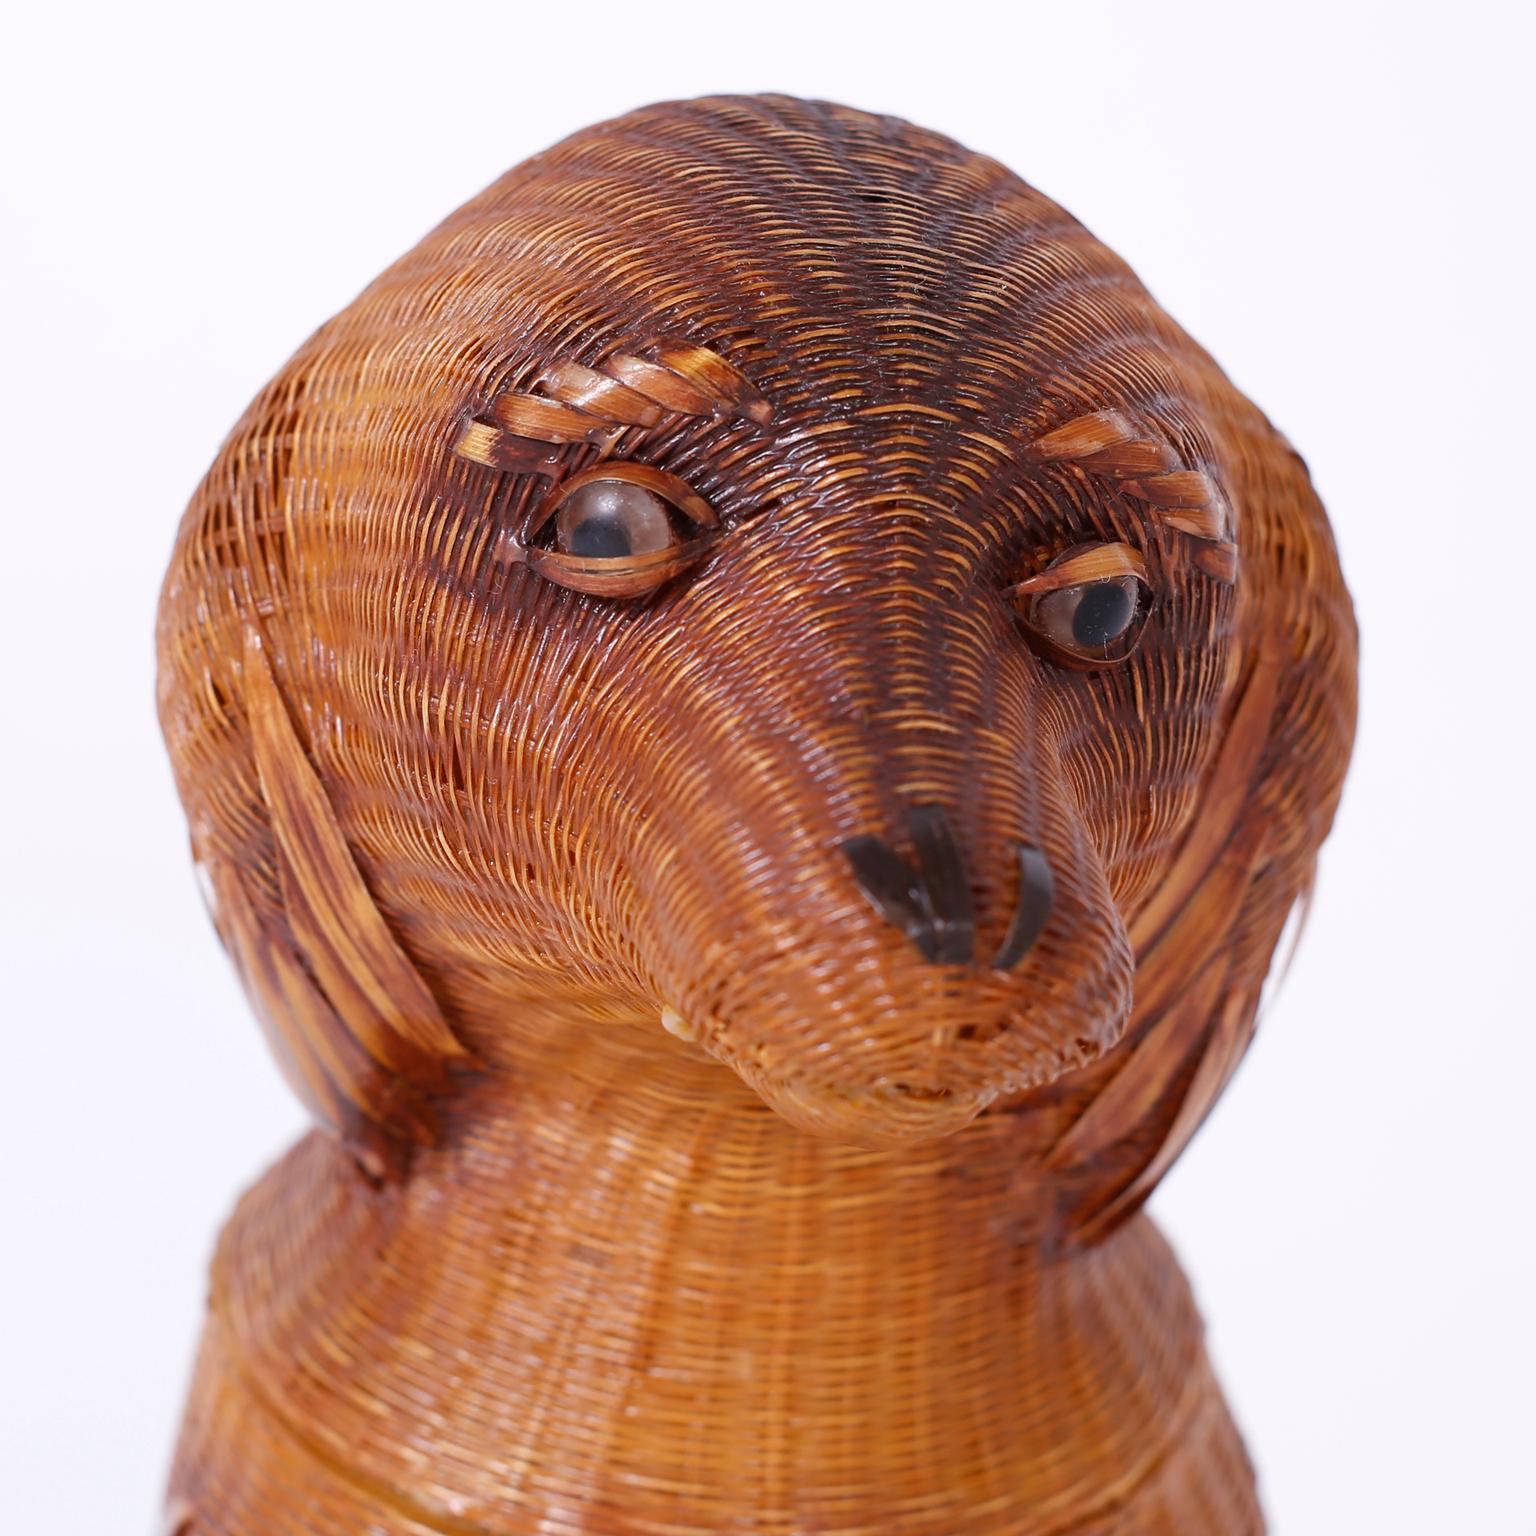 From the famed Shanghai collection, a midcentury puppy crafted in wicker and reed with a removable lid and plenty of decorative appeal.